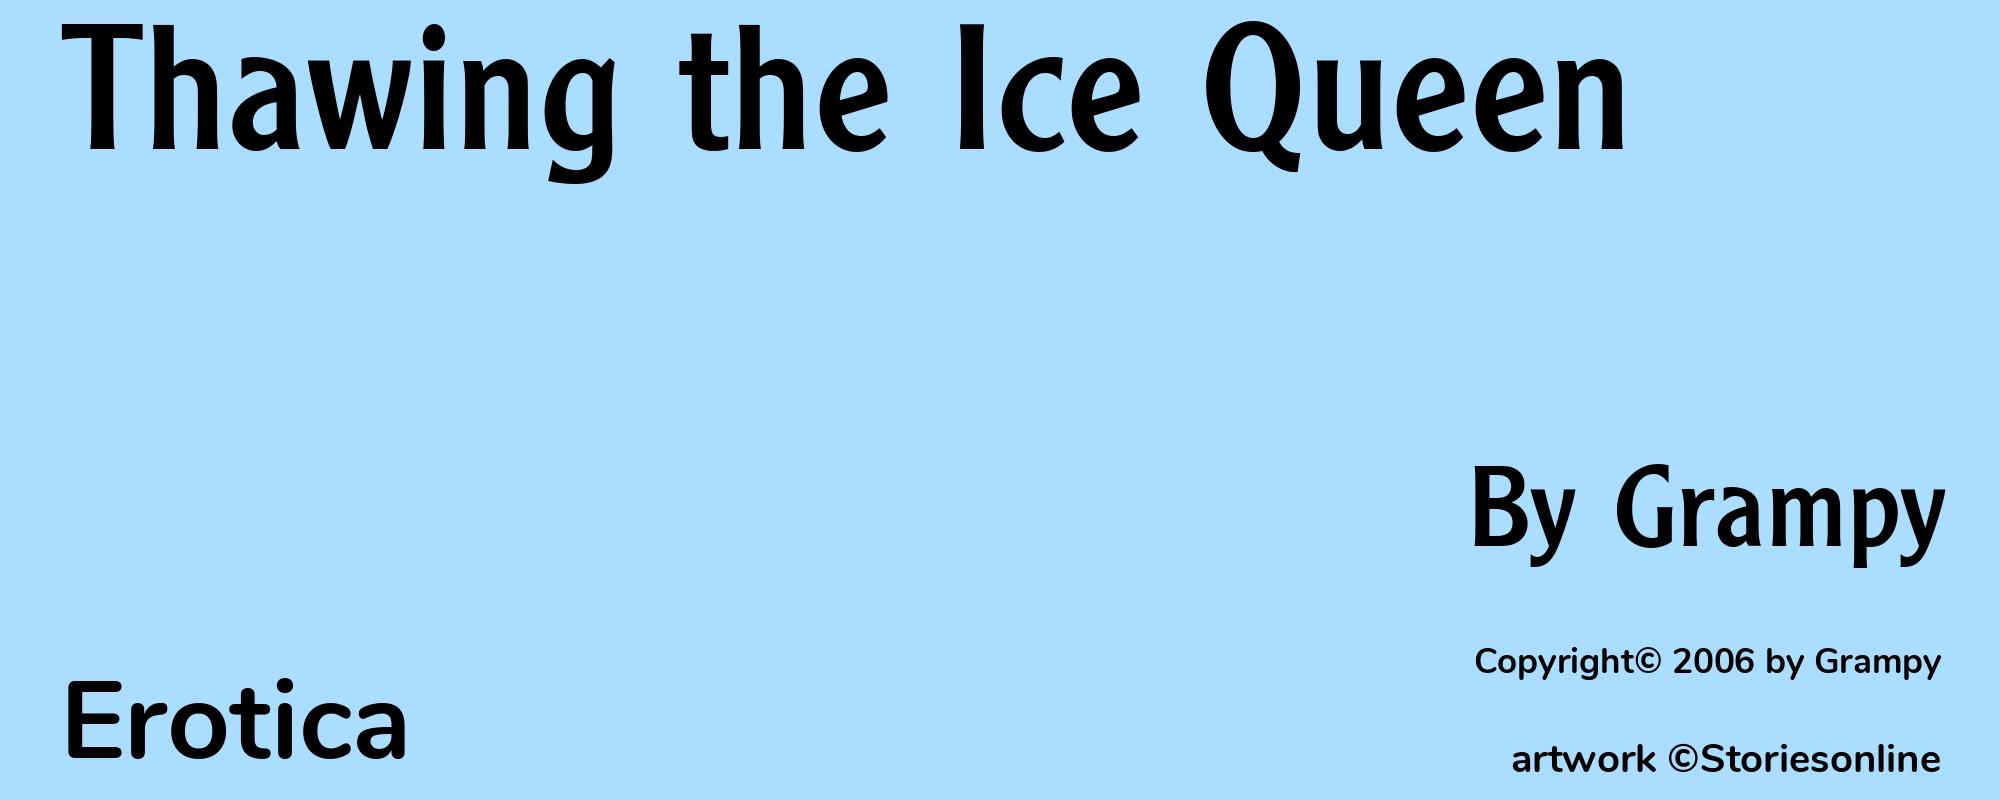 Thawing the Ice Queen - Cover